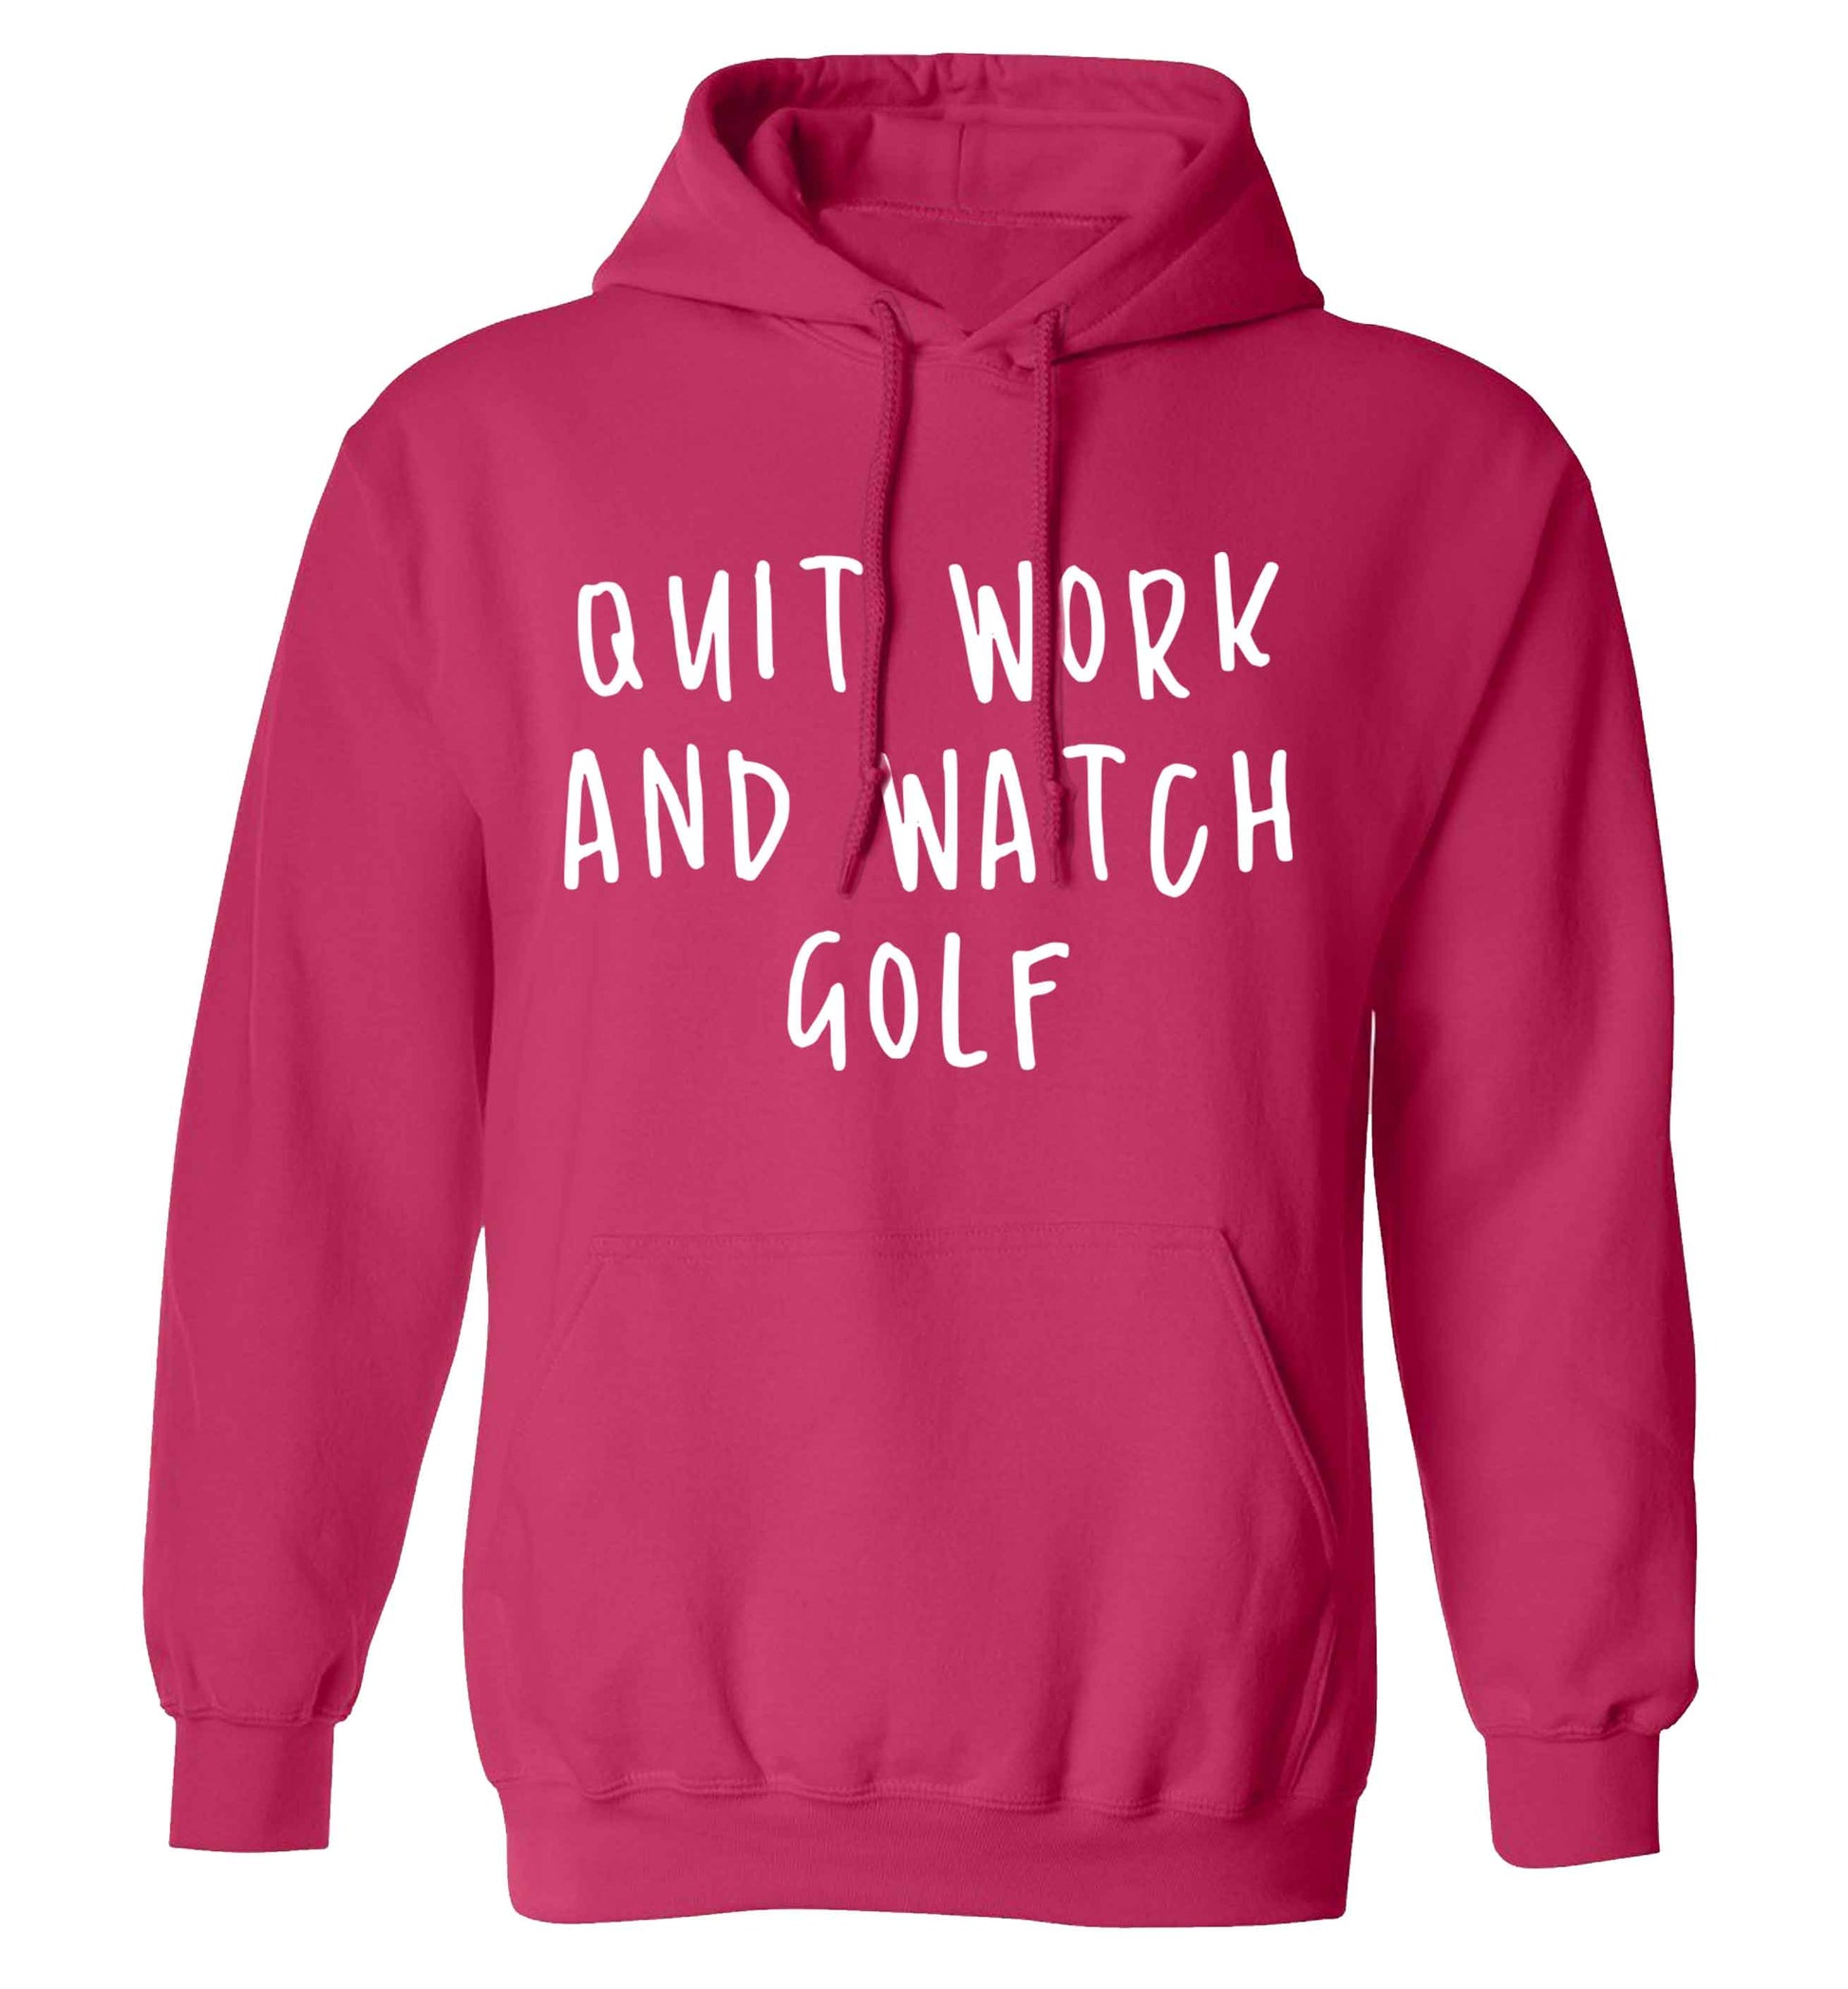 Quit work and watch golf adults unisex pink hoodie 2XL